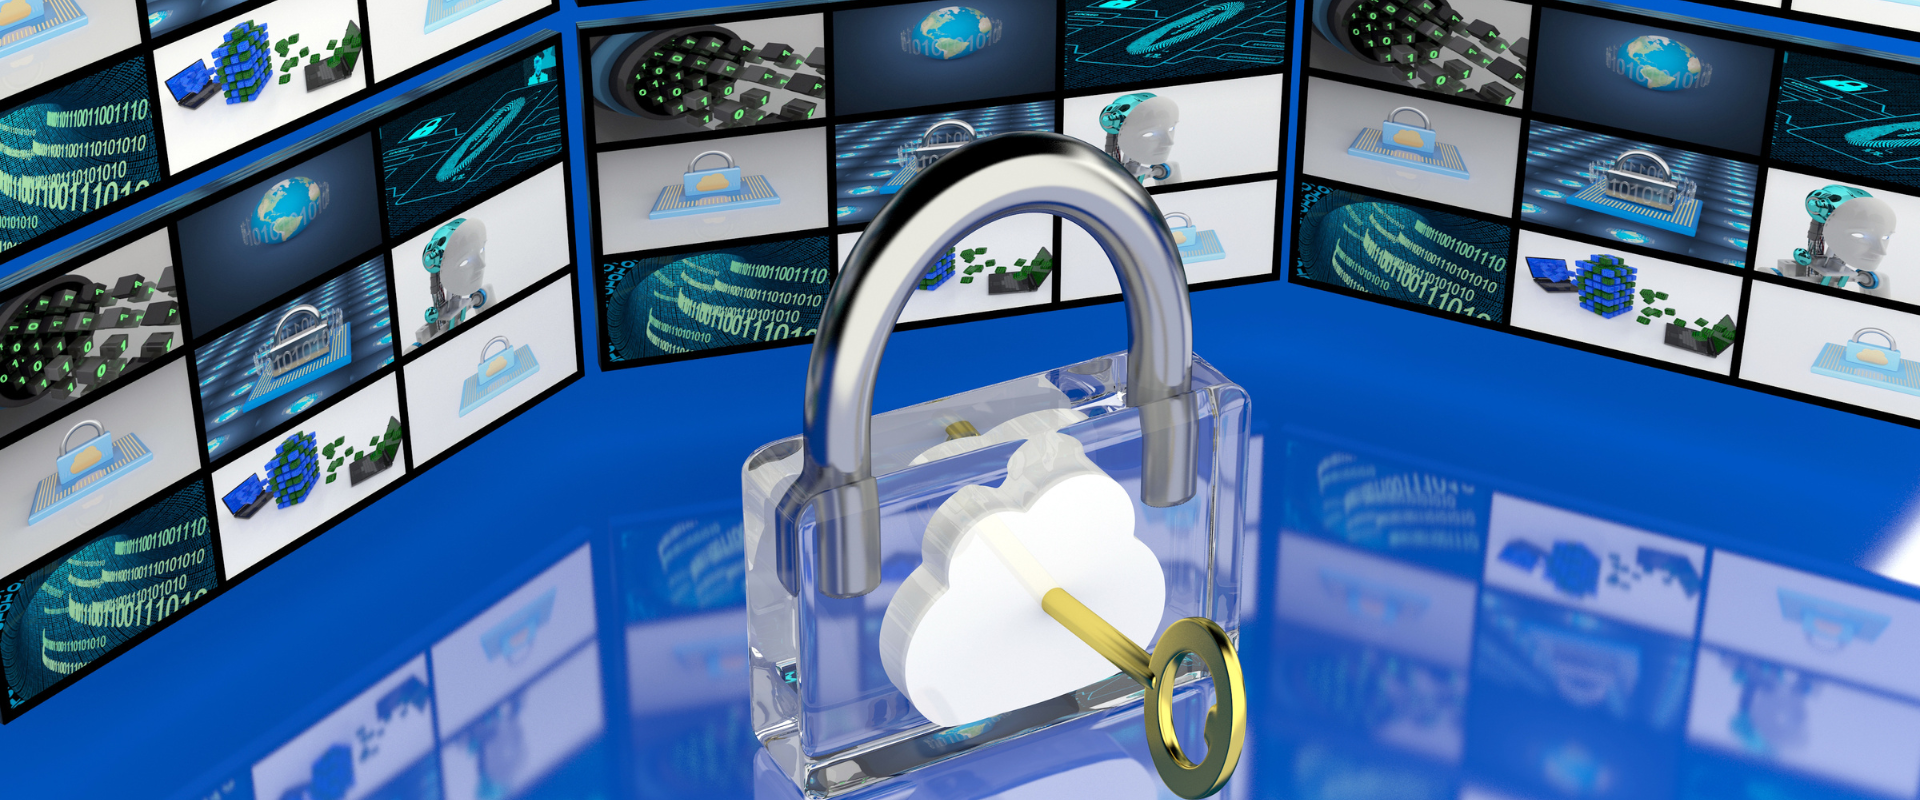 Essential Cloud Security Practices for Safeguarding Your Business Data